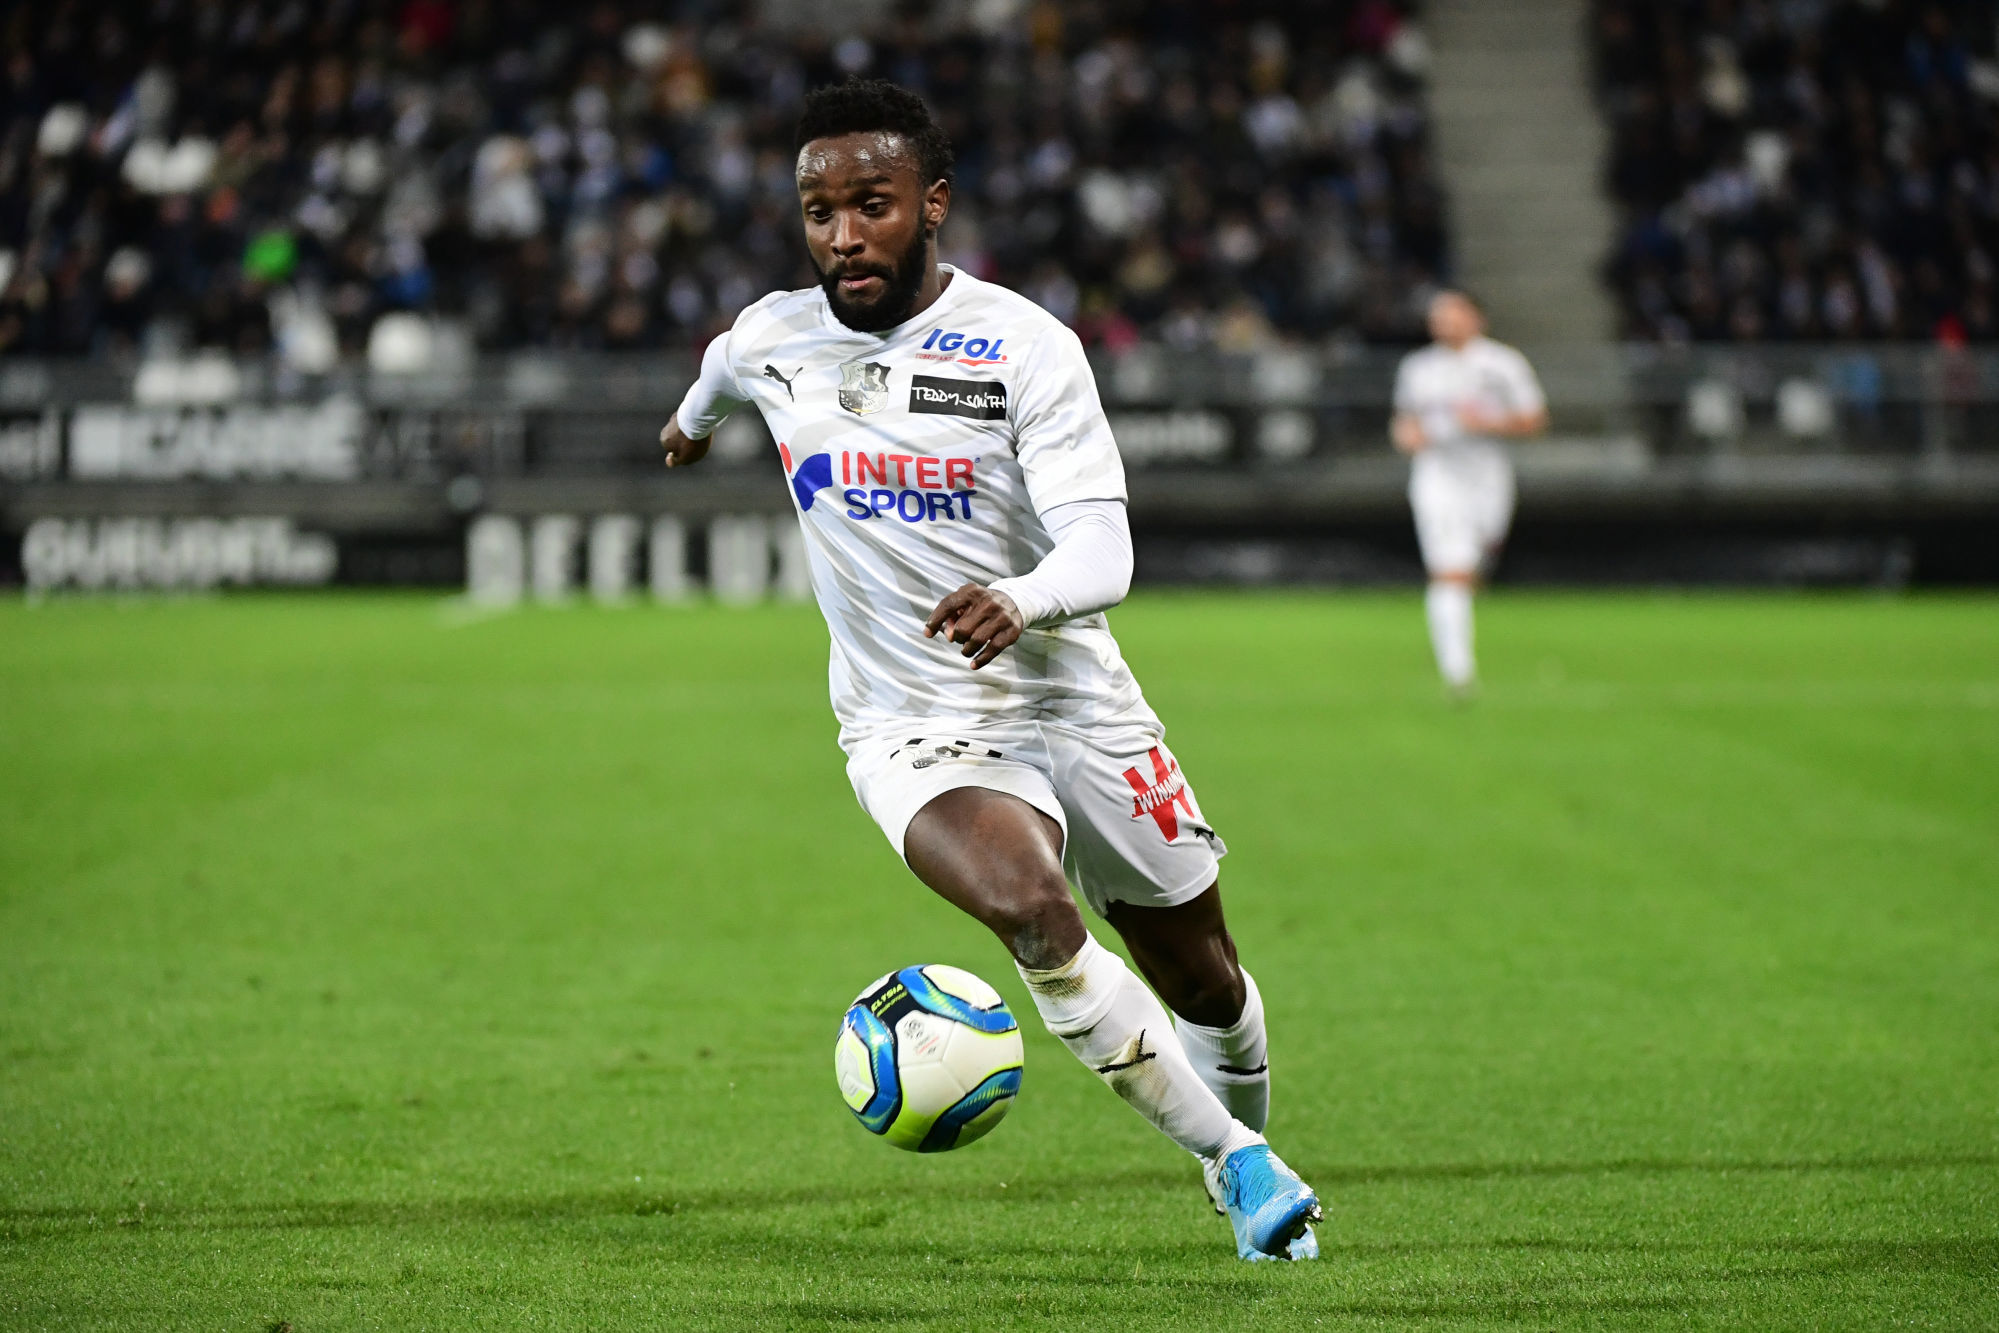 Stiven MENDOZA of Amiens during the Ligue 1 match between Amiens and Dijon at Stade de la Licorne on December 14, 2019 in Amiens, France. (Photo by Dave Winter/Icon Sport) - Stiven MENDOZA - Stade de la Licorne - Amiens (France)